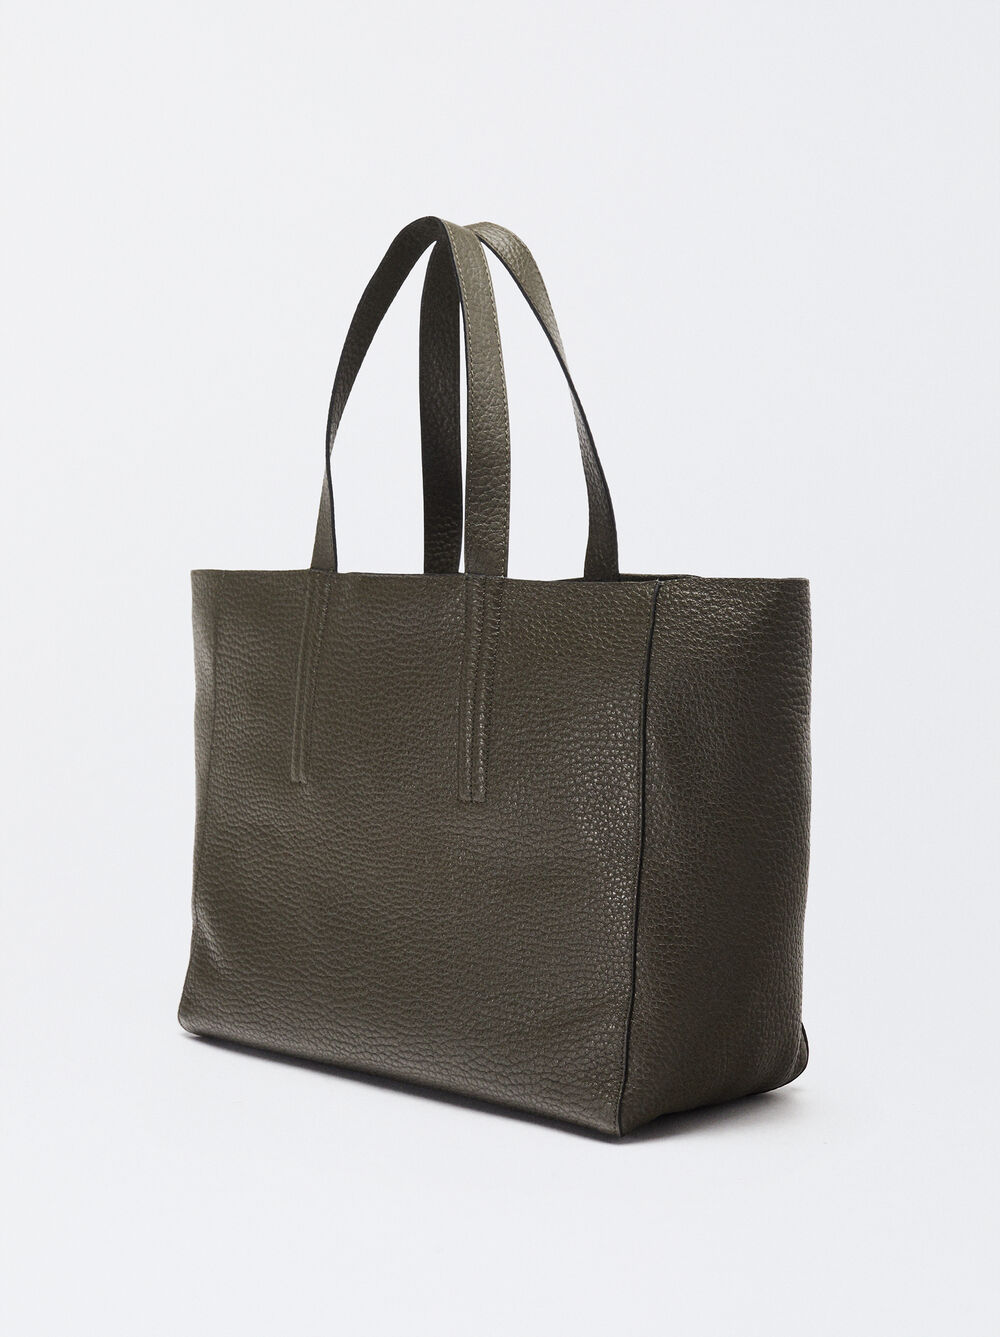 Personalized Leather Shopper Bag